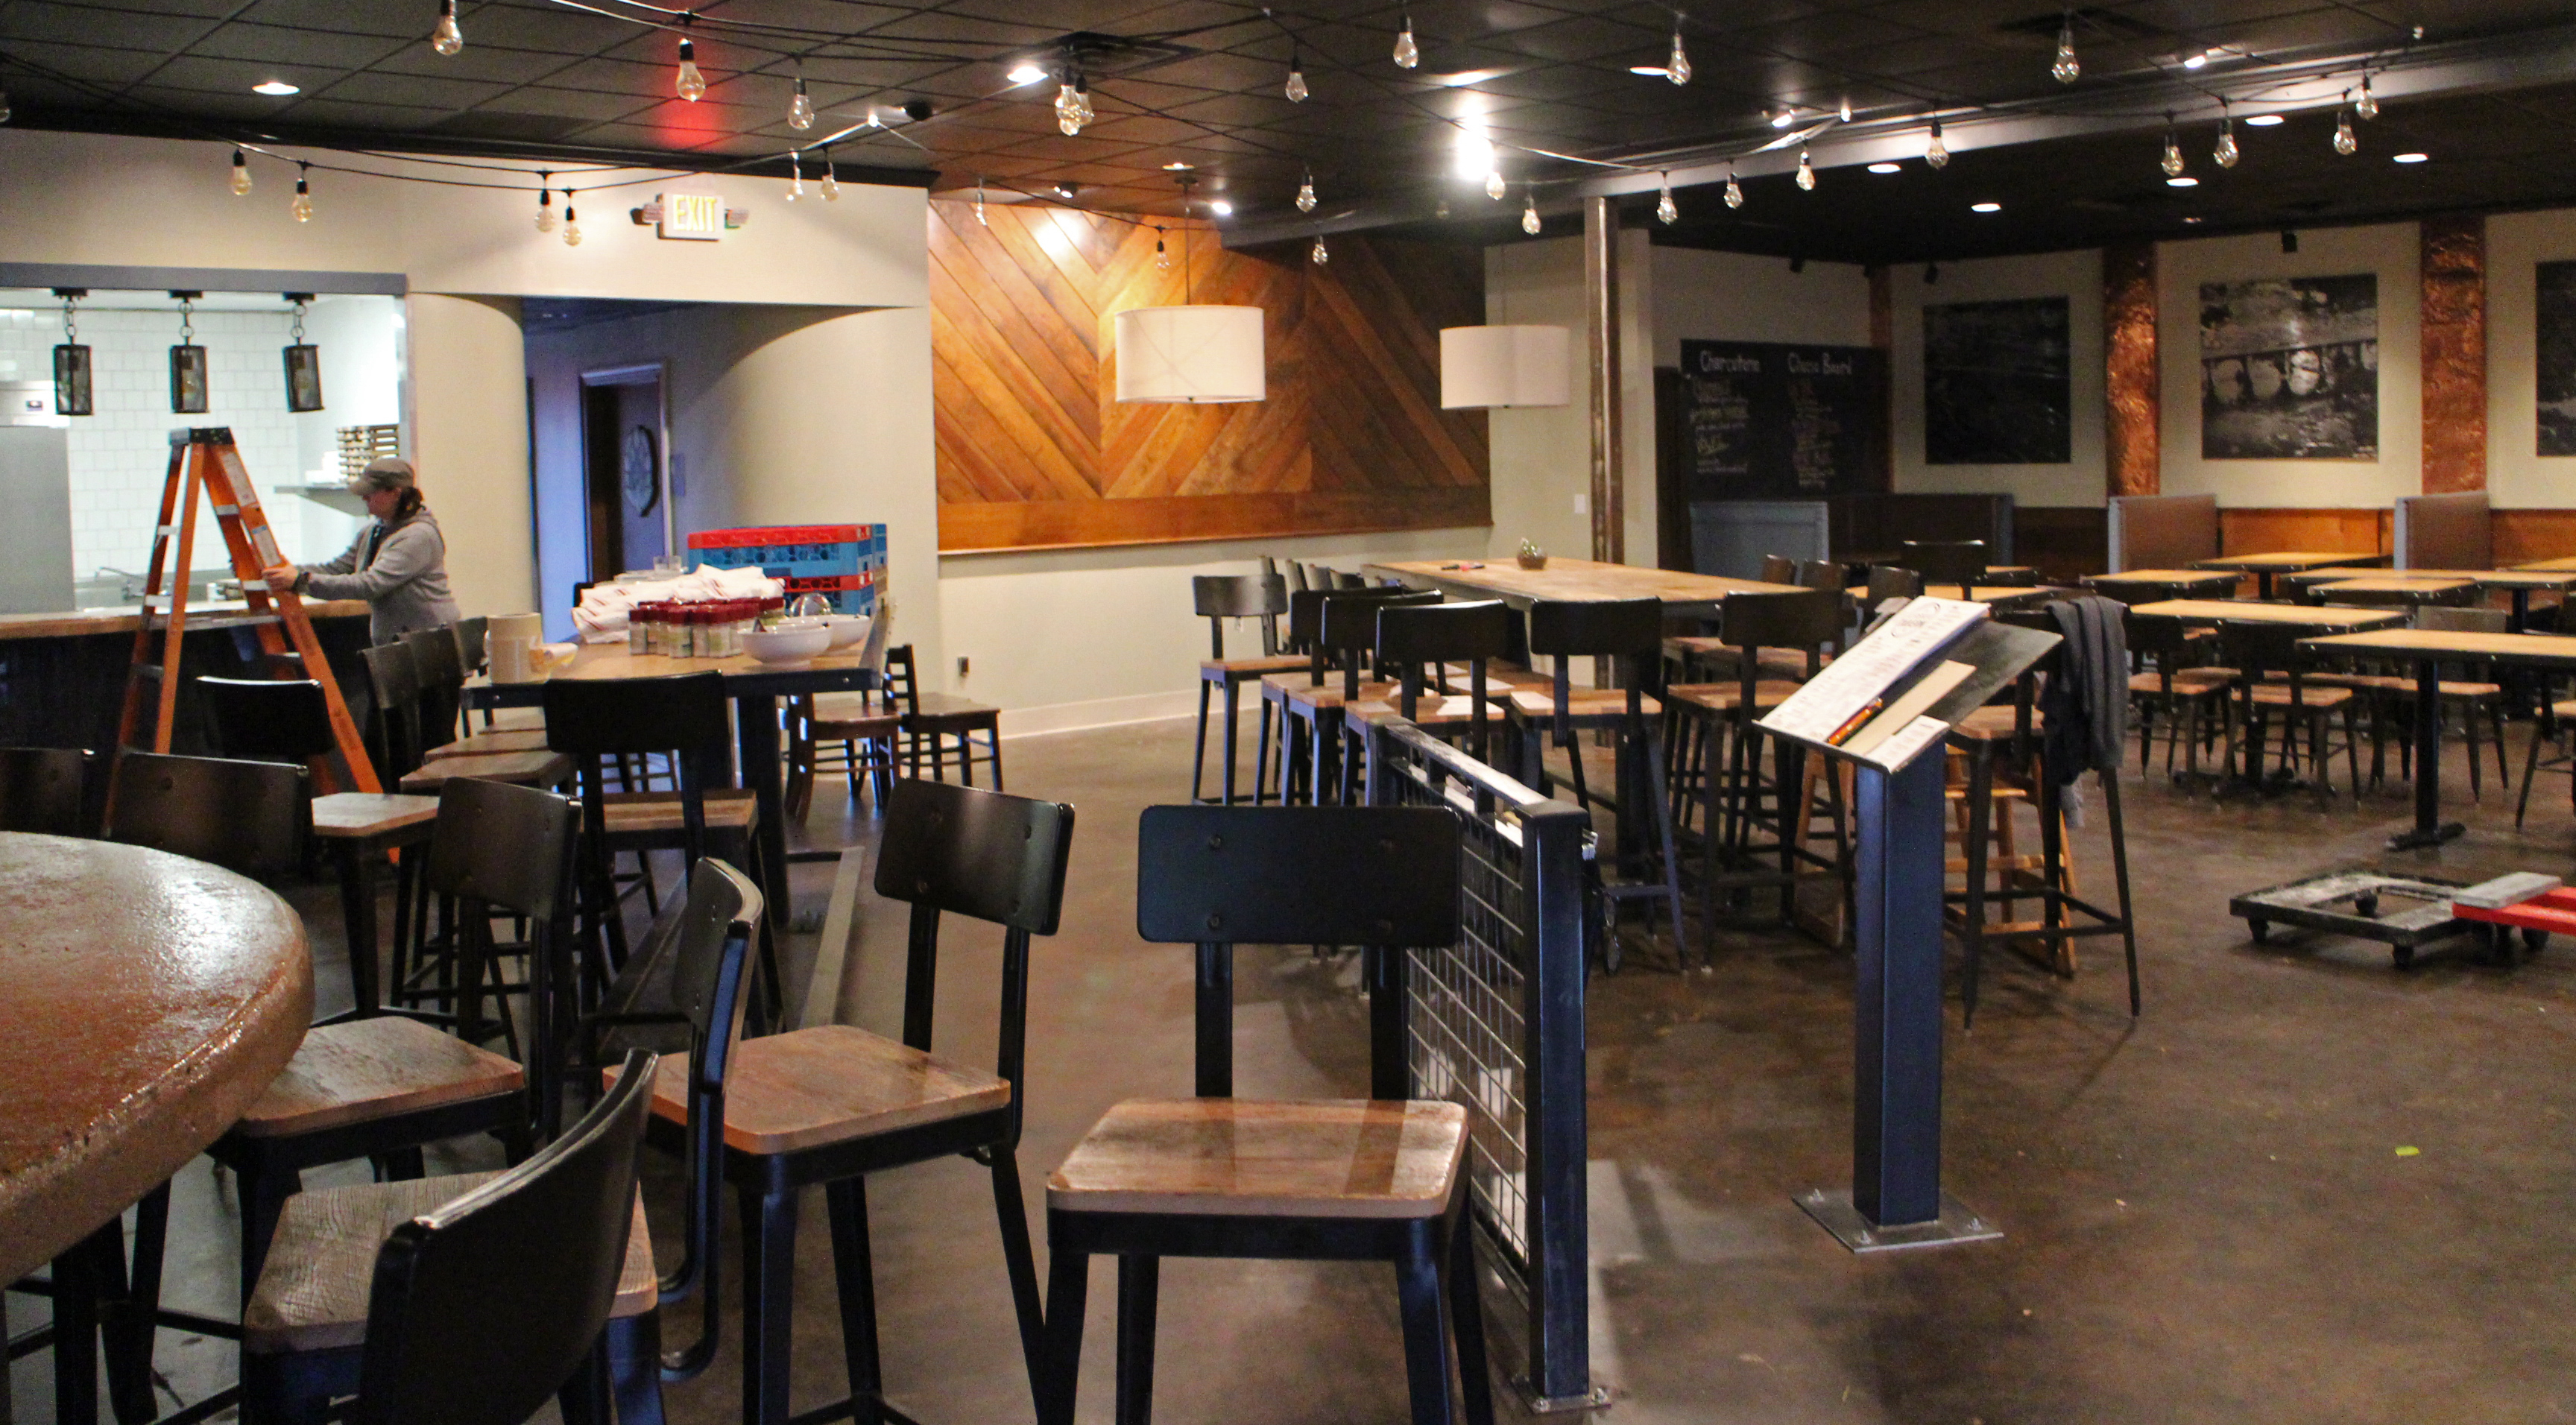 The Urban Tavern space is being transformed into a new concept. Photos by Evelyn Rupert.